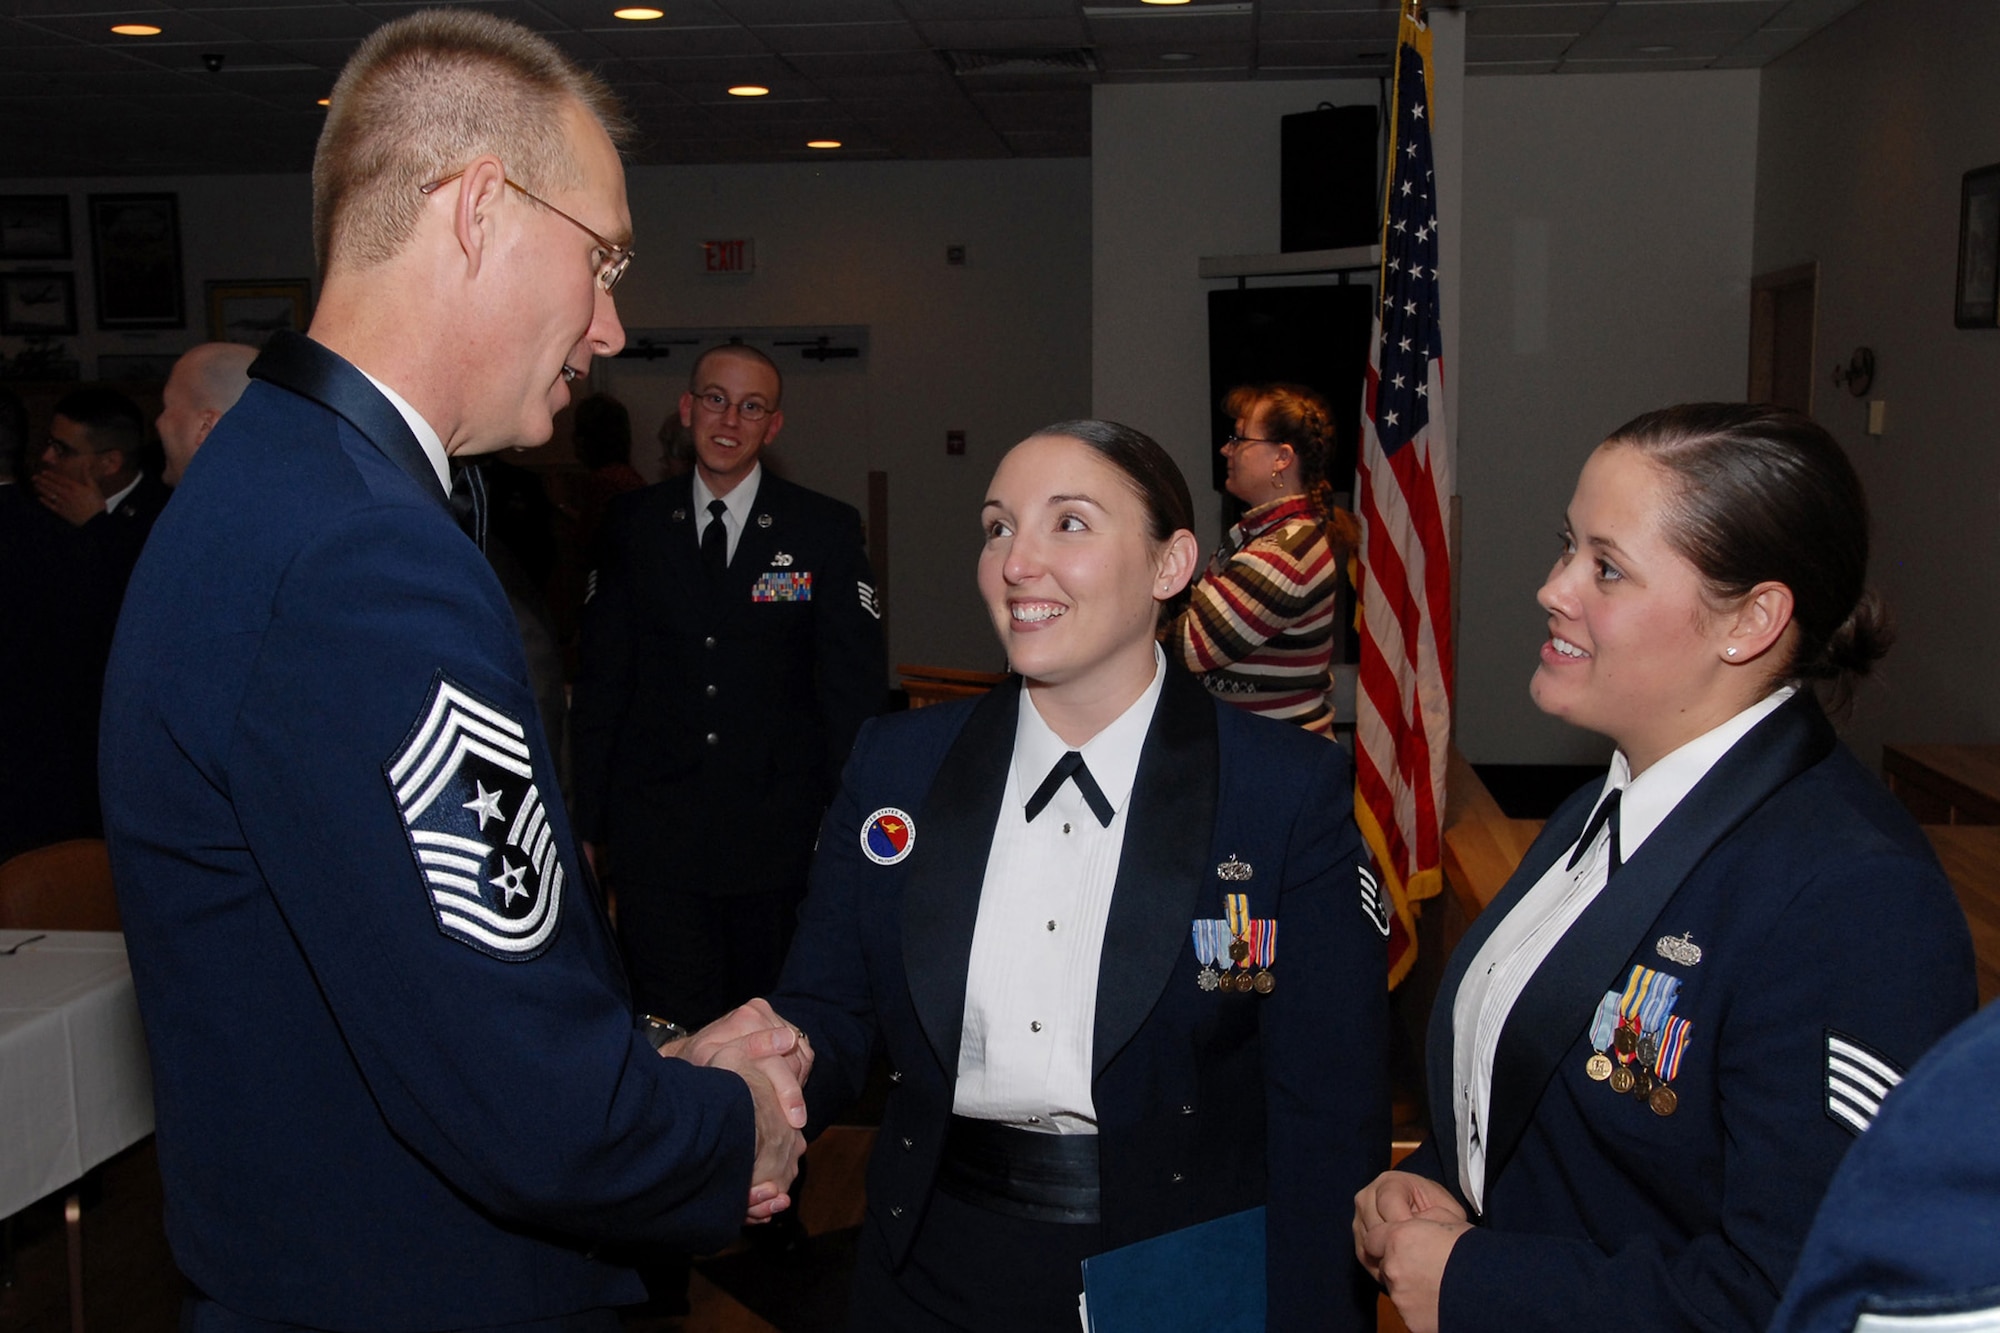 Airmen Leadership School instructors Staff Sgt. Lacie Jo Collins (shaking hands) and Elizabeth Poole thank Air Force Space Command Command Chief Master Sgt. Todd Small for his inspirational address to the graduating class March 25. Chief Small was the keynote speaker. (U.S. Air Force photo/John Turner)